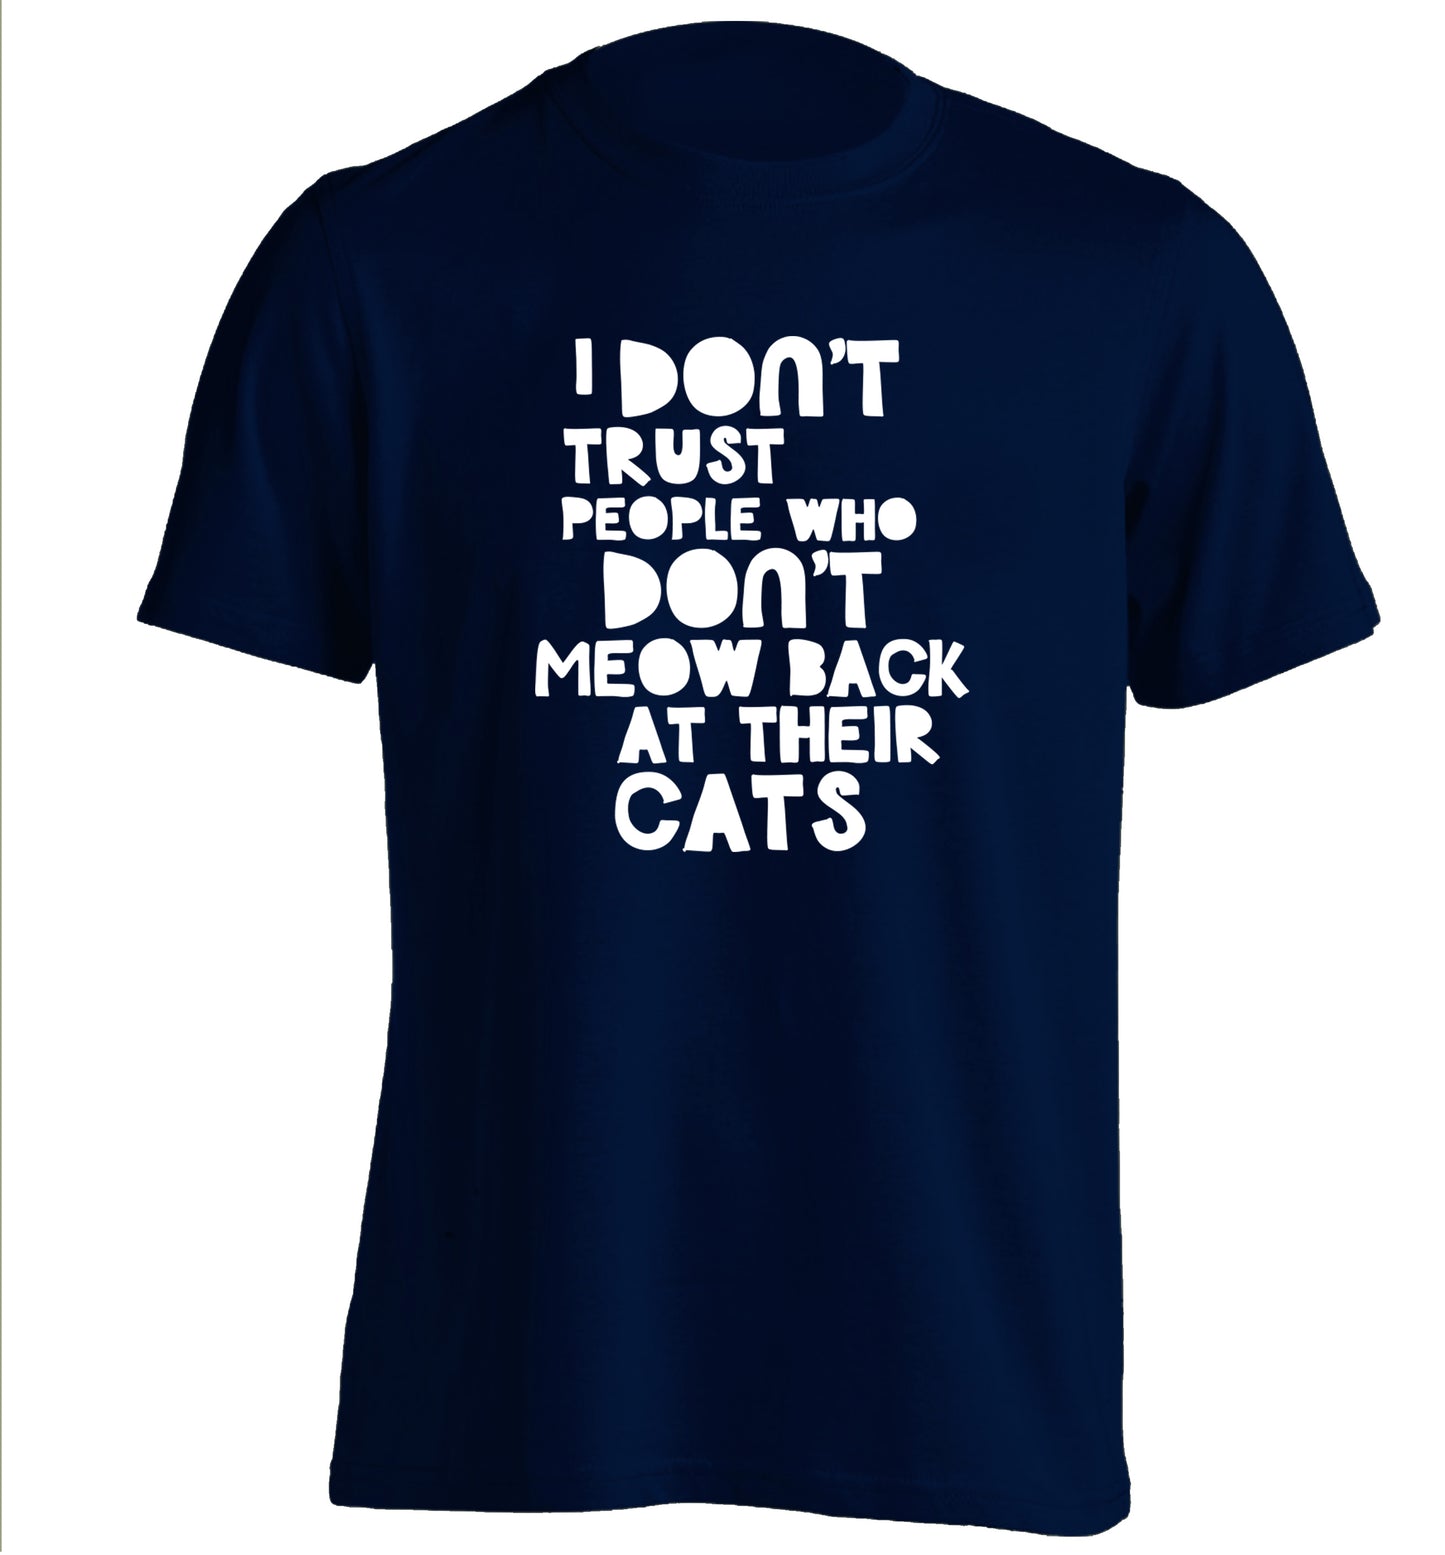 I don't trust people who don't meow back at their cats adults unisex navy Tshirt 2XL